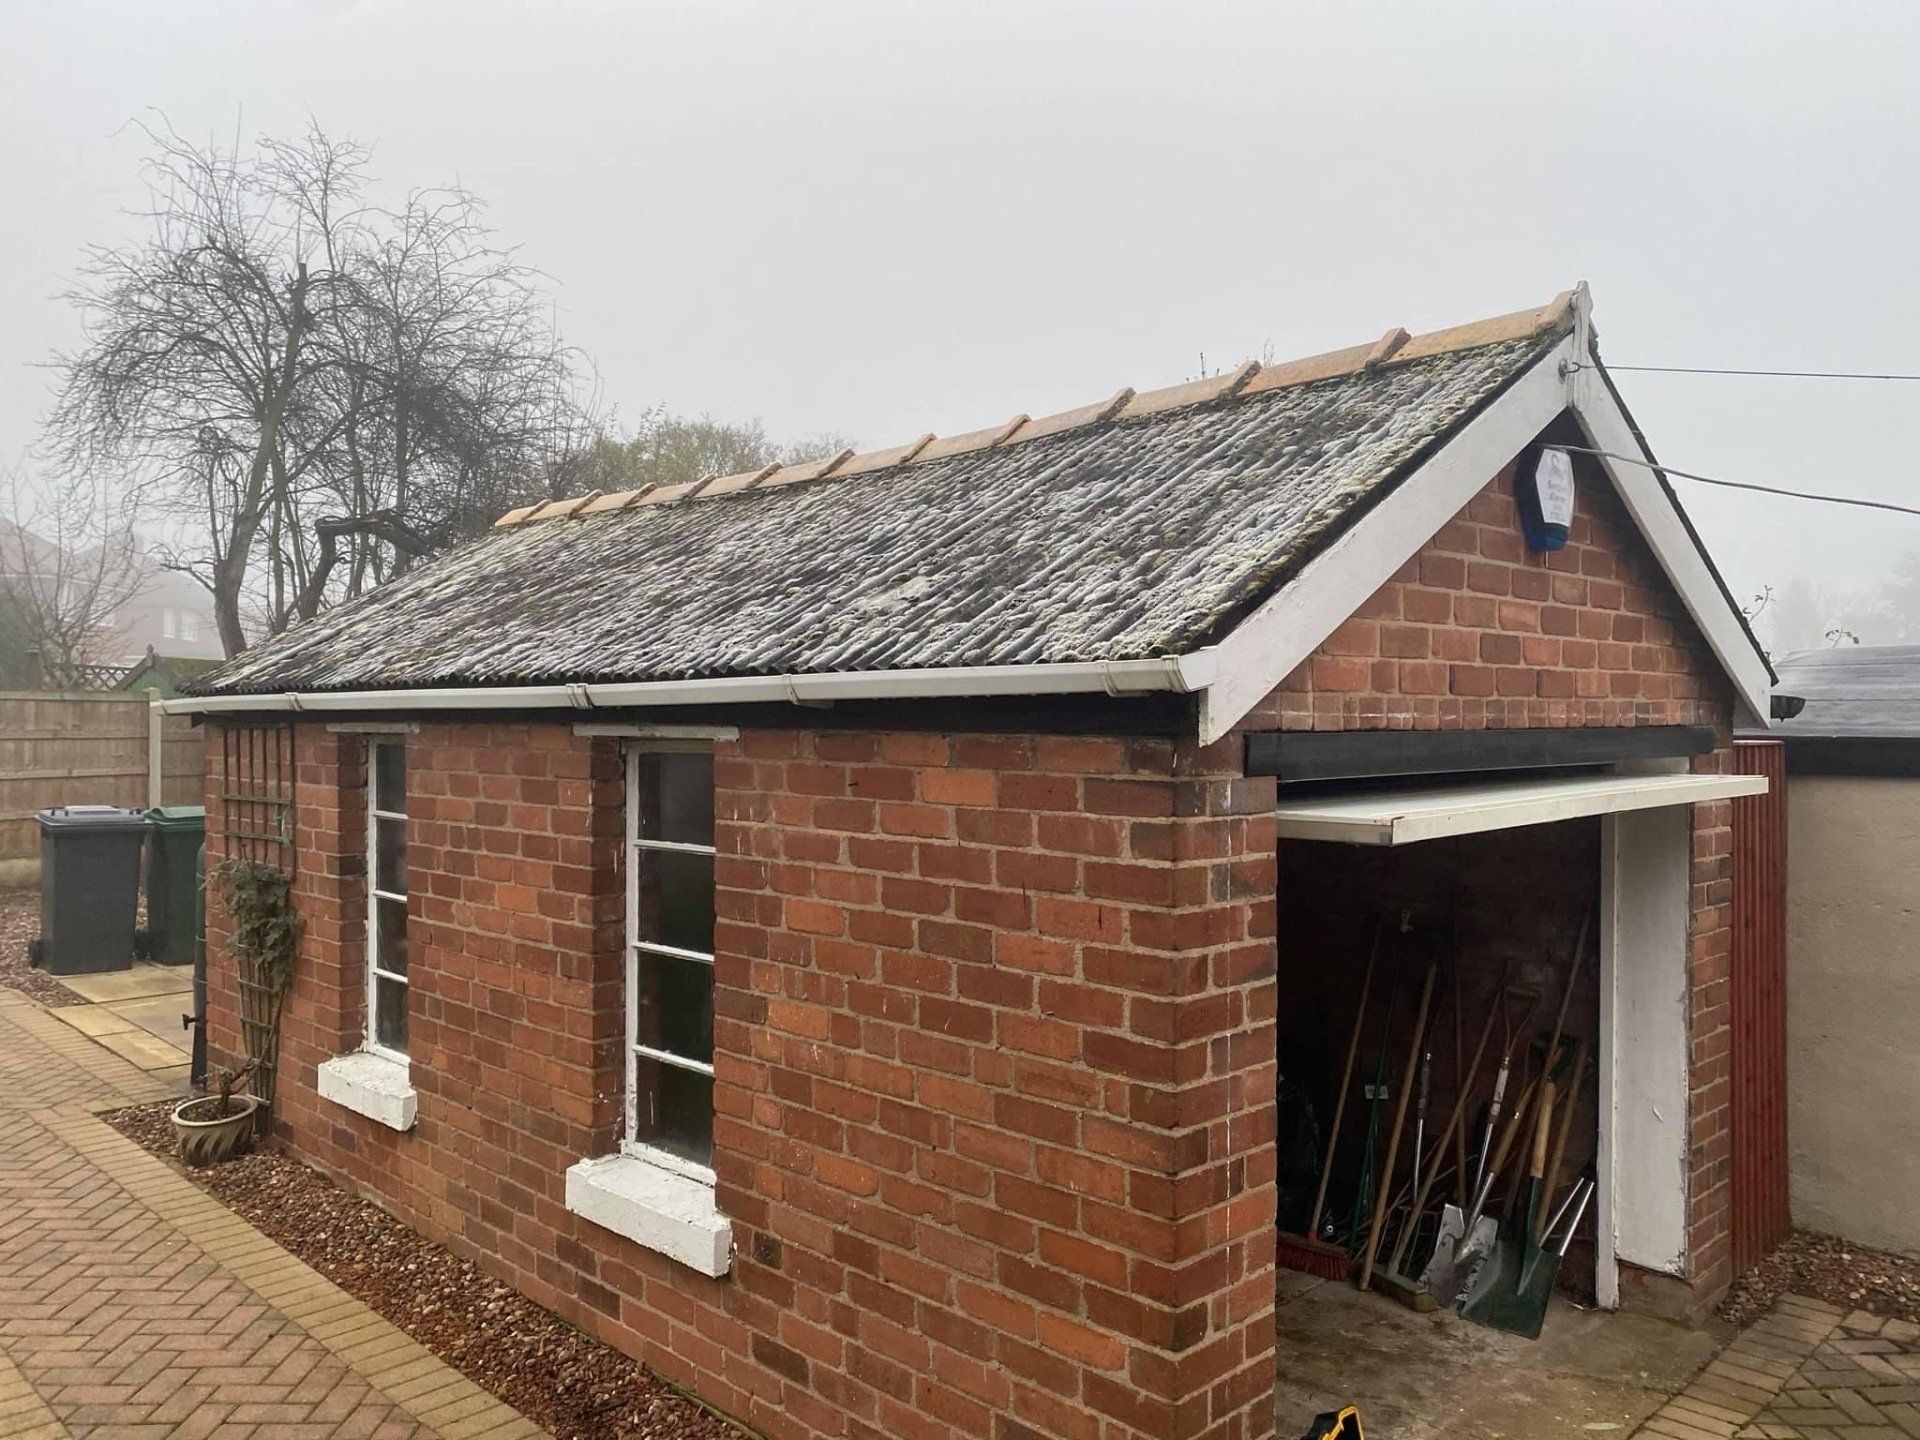 Pebble dashed garage with asbestos roof